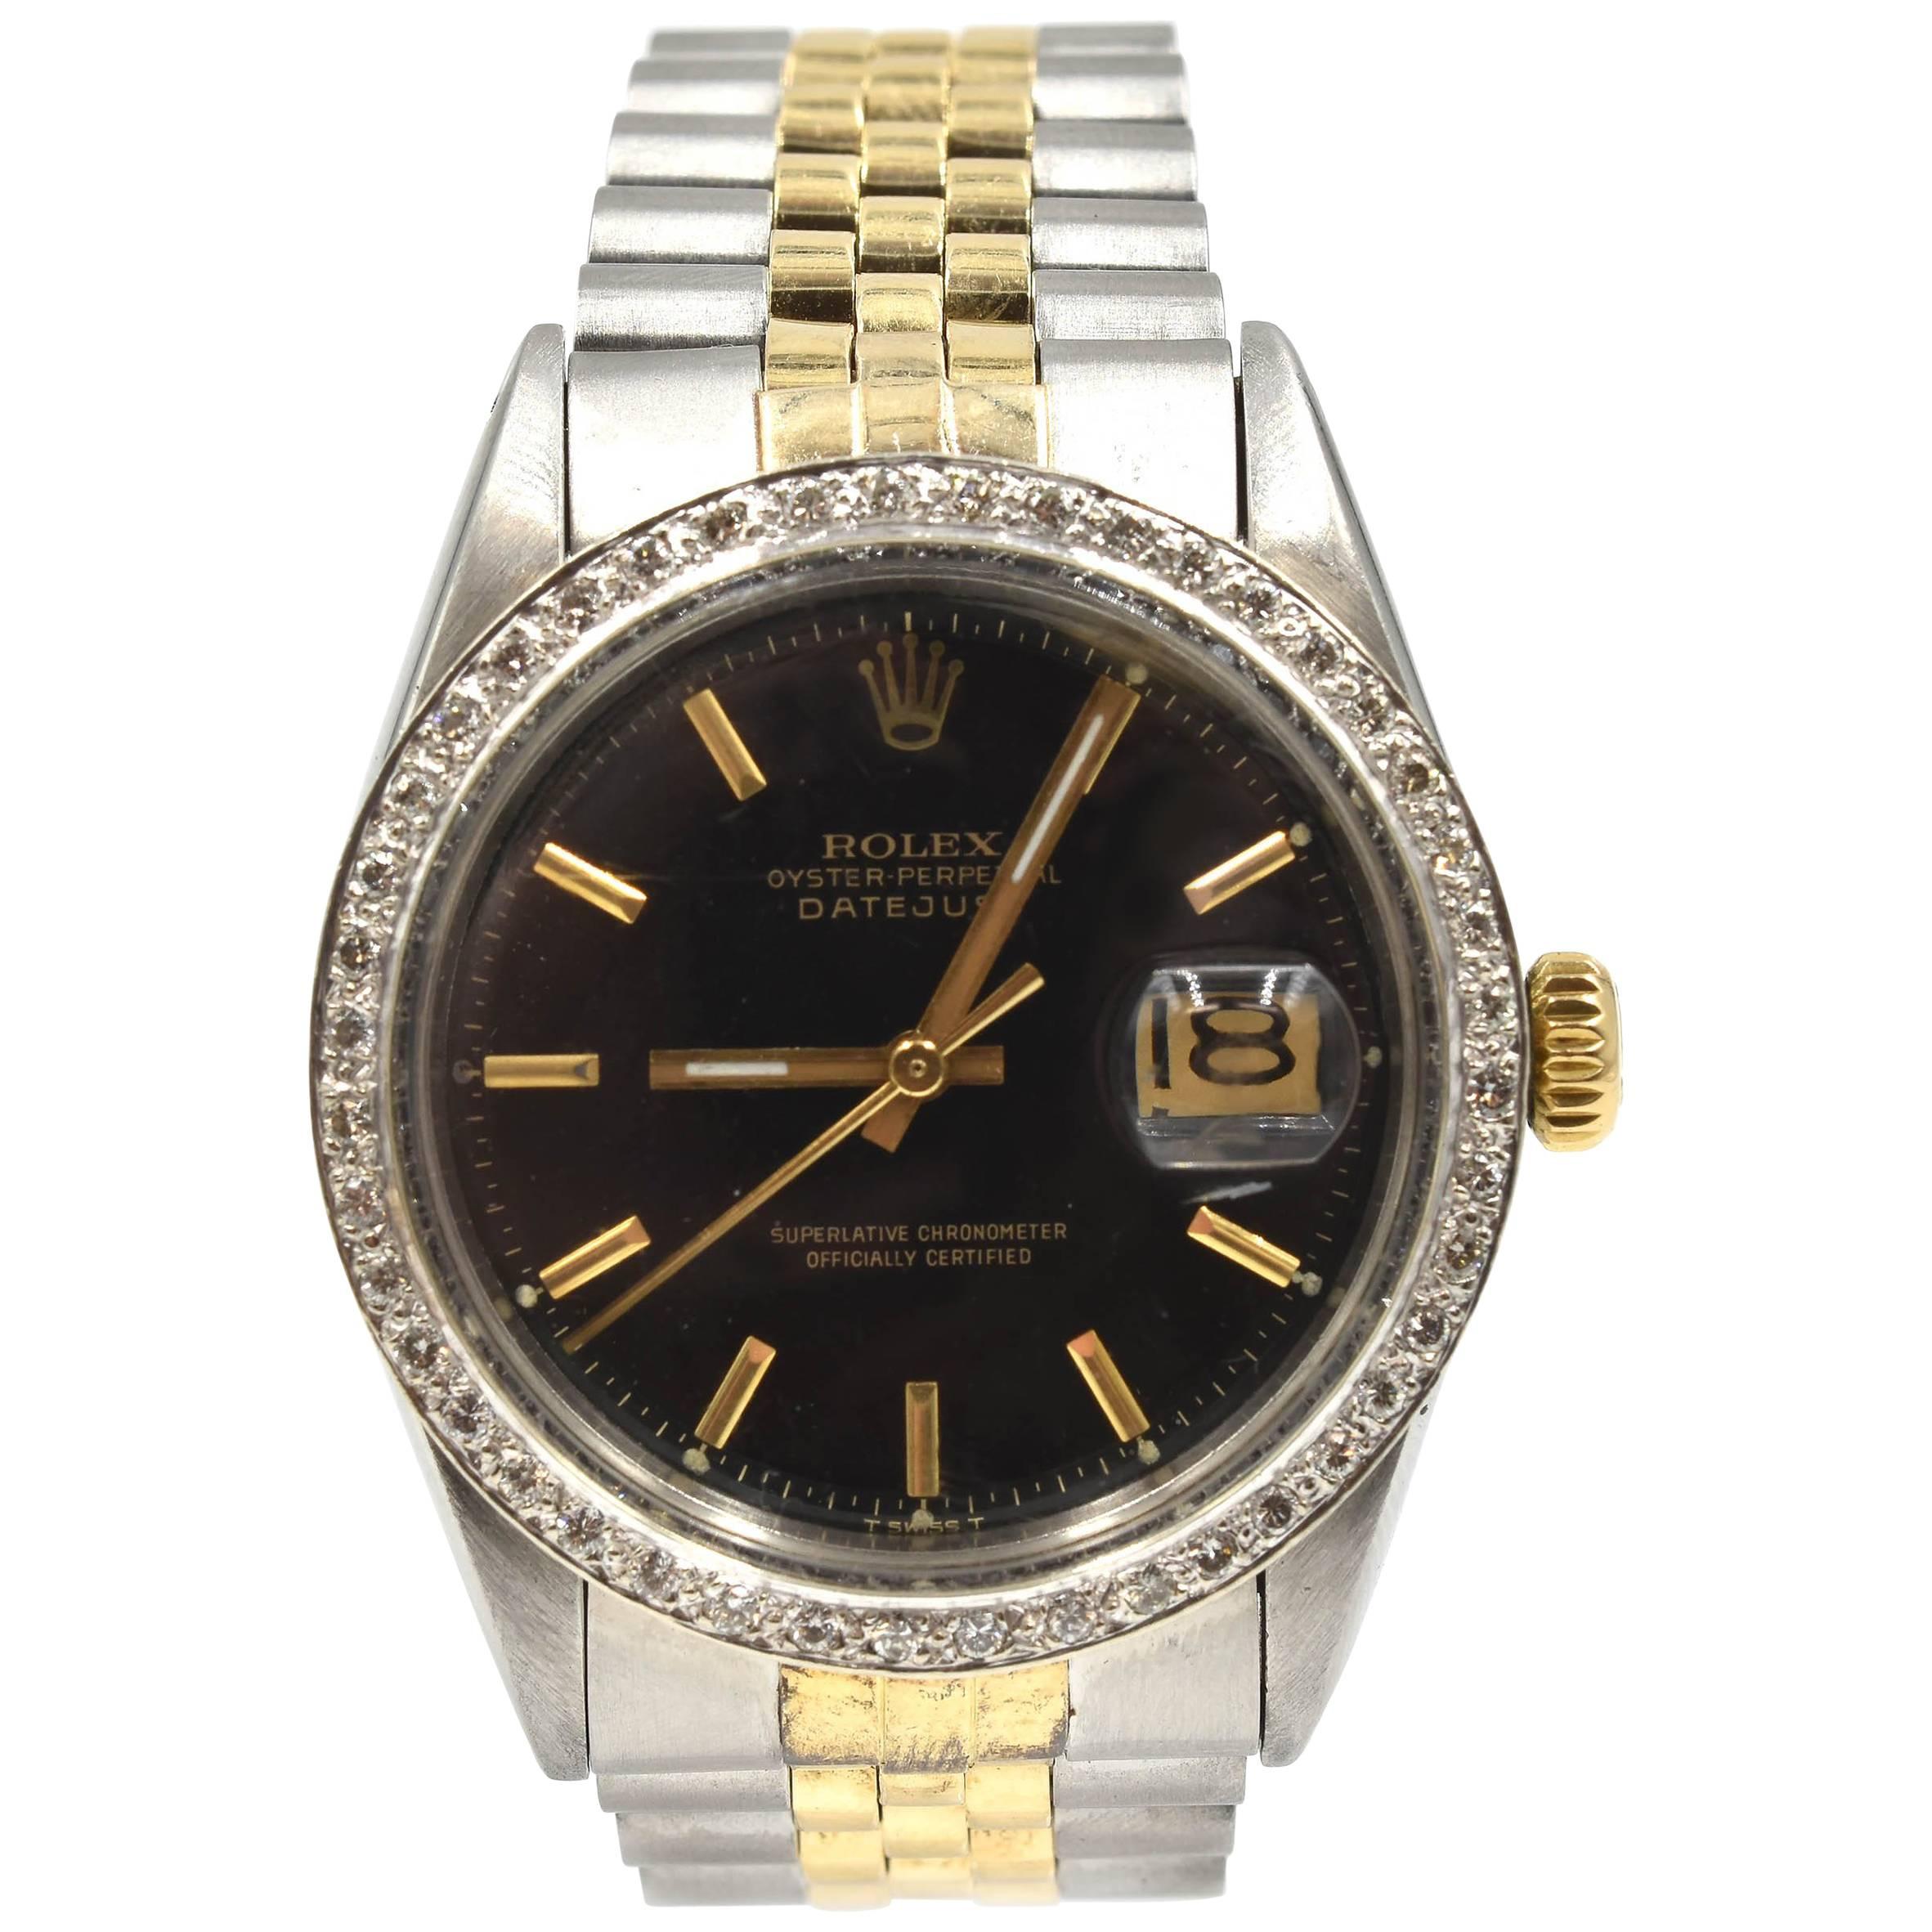 Rolex Yellow Gold Stainless Steel Vintage Datejust Automatic Wristwatch Ref 1601